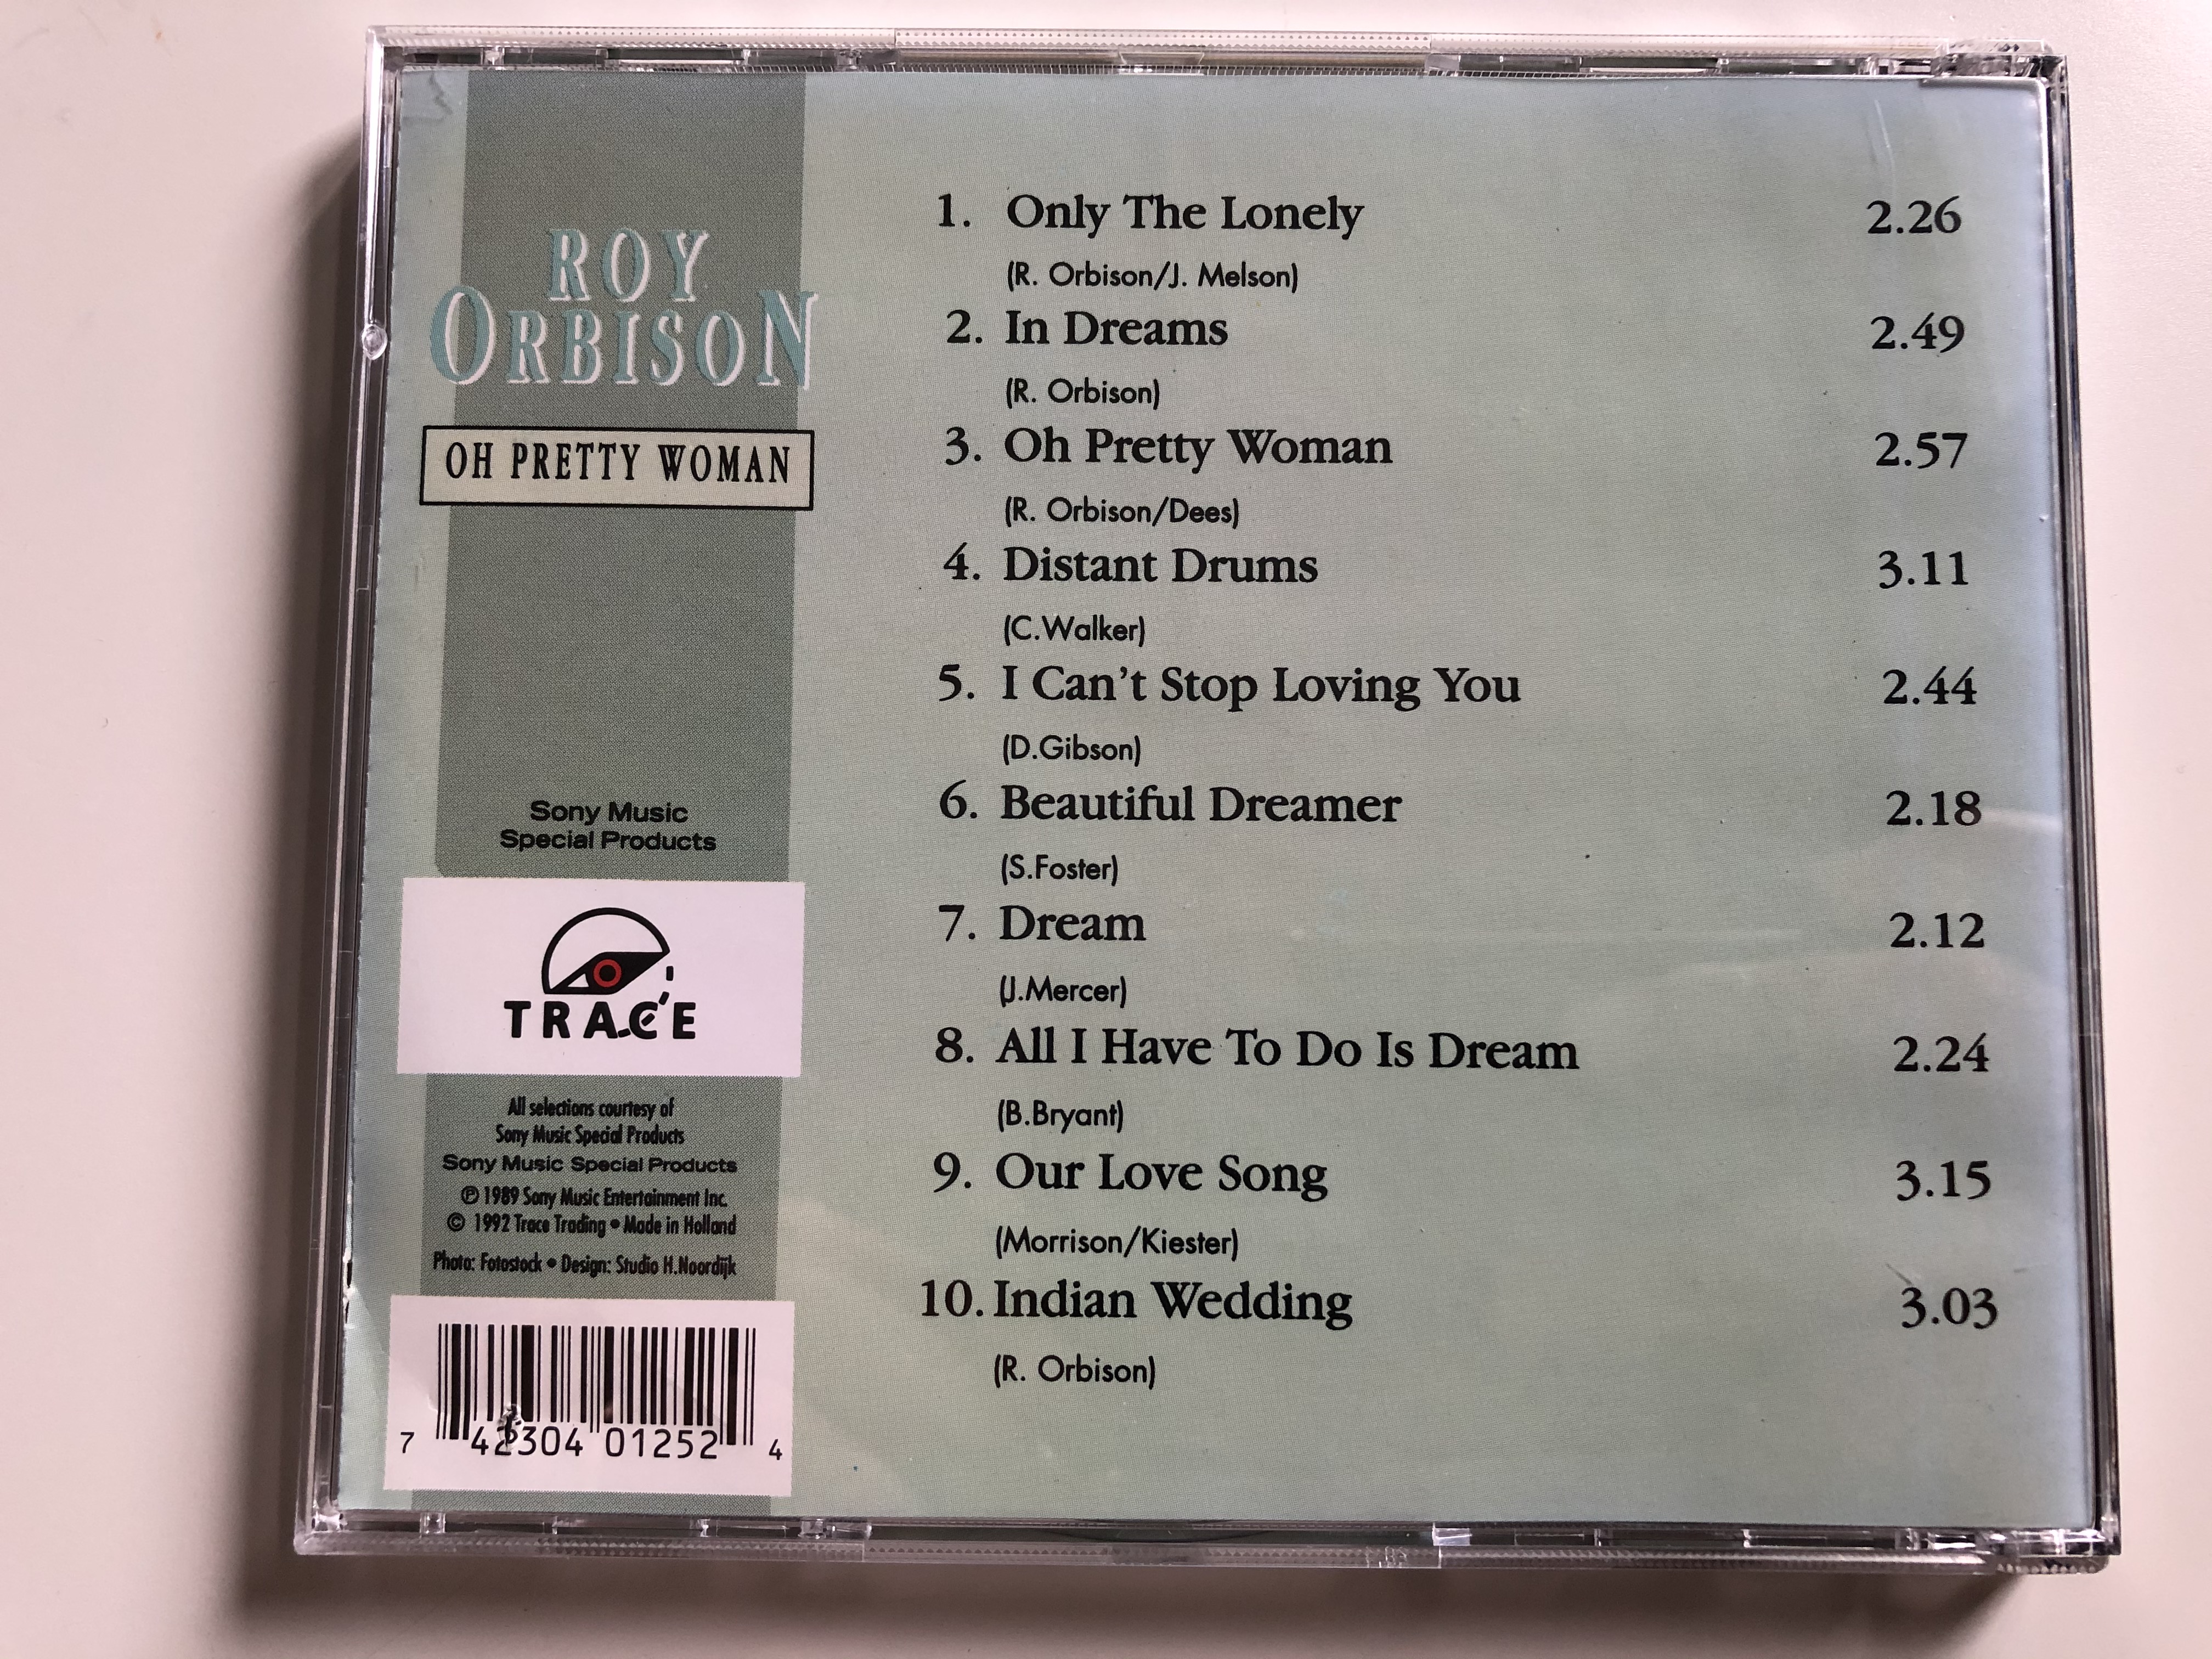 the-world-of-roy-orbison-oh-pretty-woman-including-only-the-lonely-in-dreams-all-i-have-to-do-is-dream-i-can-t-stop-loving-you-trace-trading-audio-cd-1992-0401252-4-.jpg